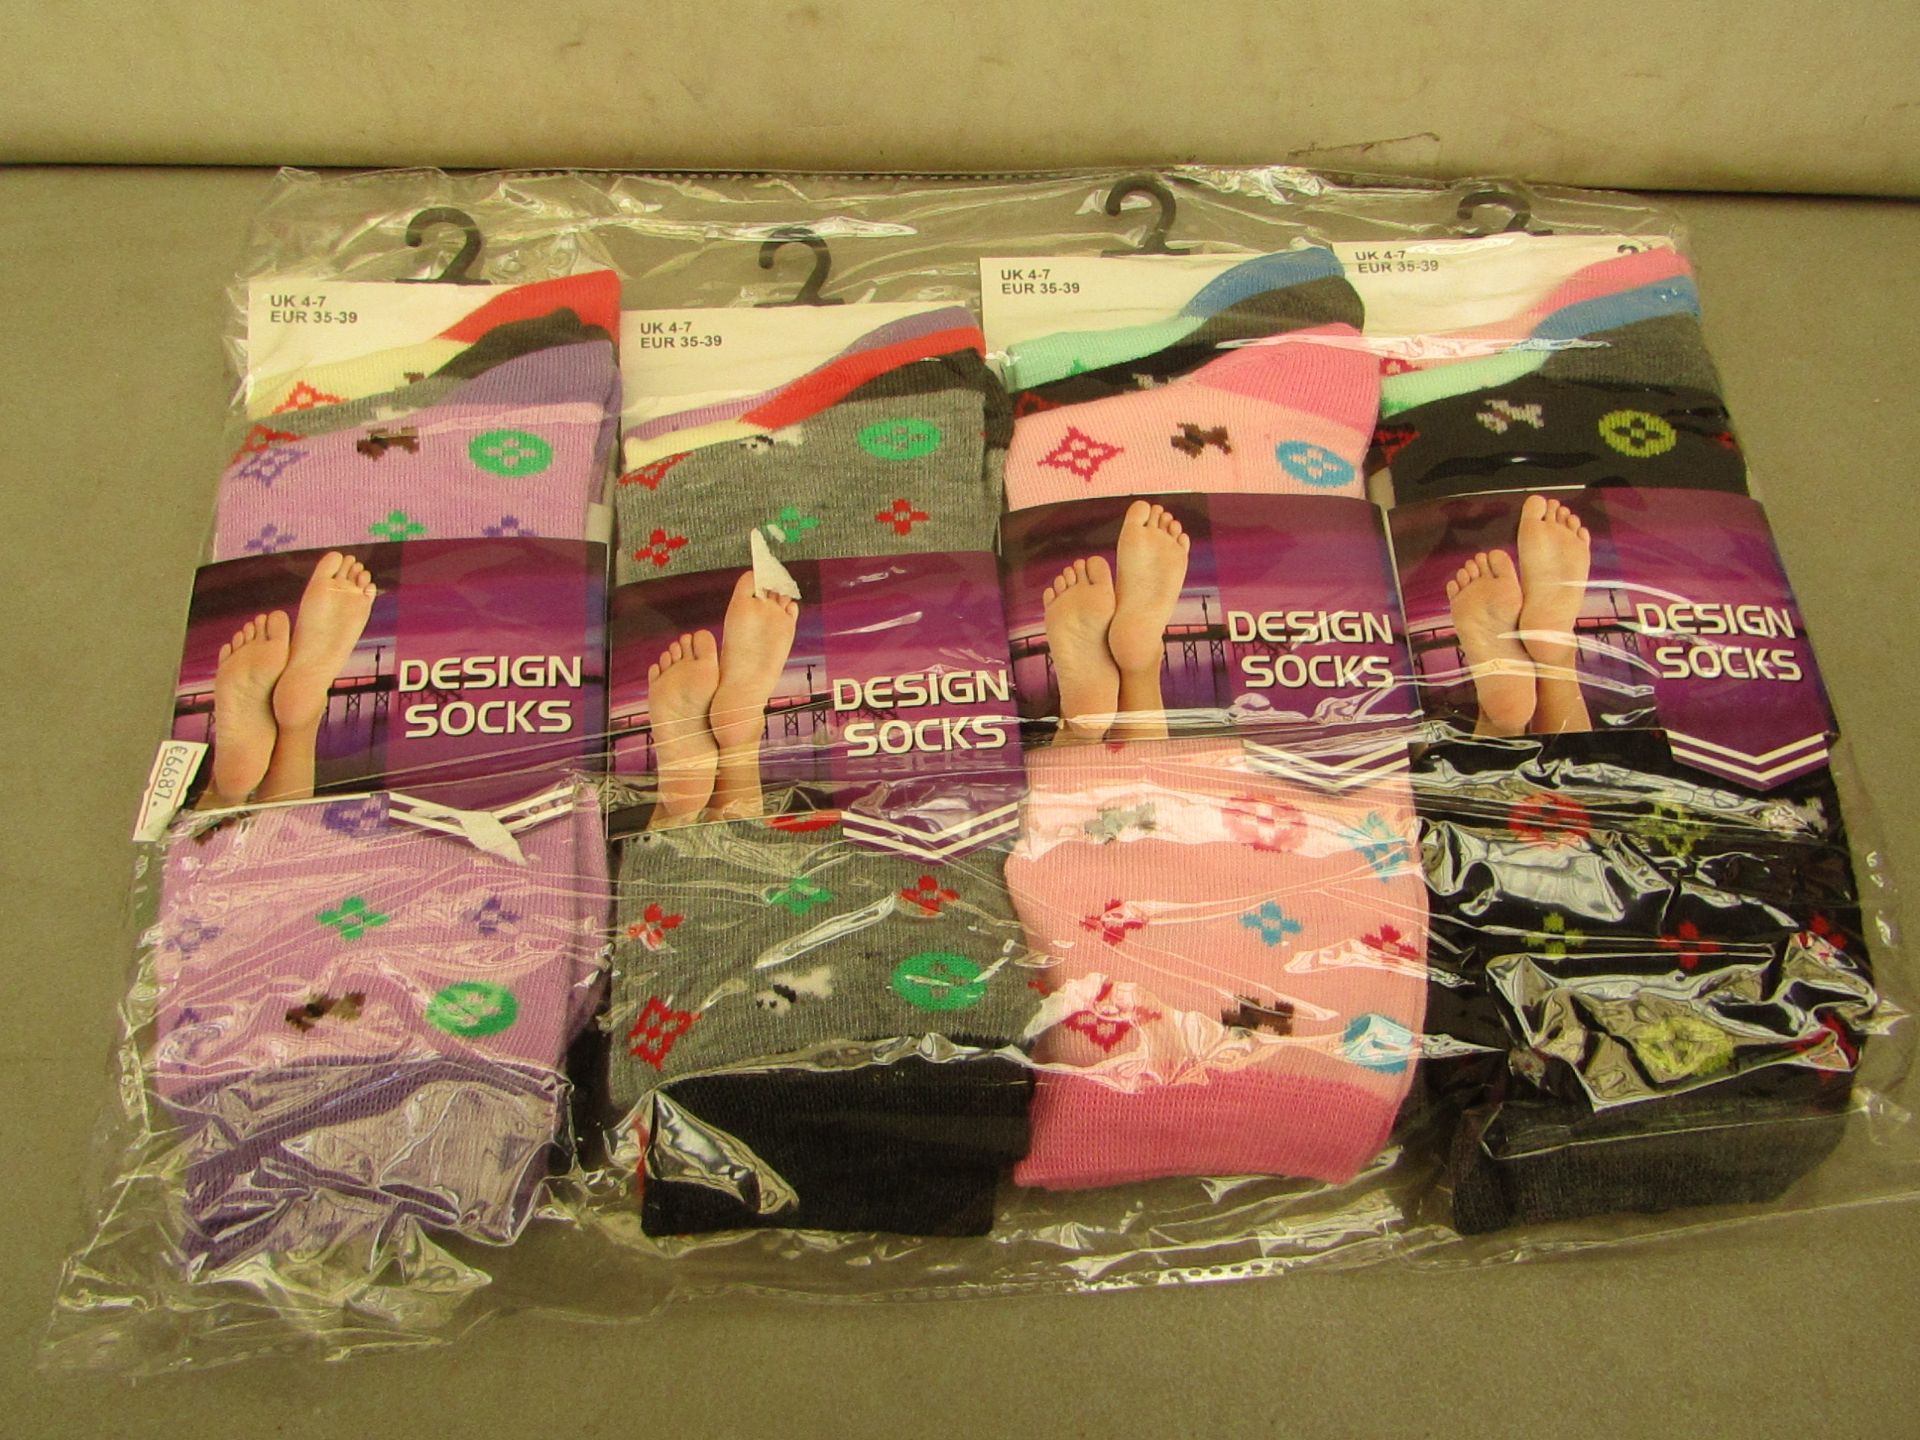 12 x pairs of Design Ladies Patterned Socks size 4-7 new & packaged